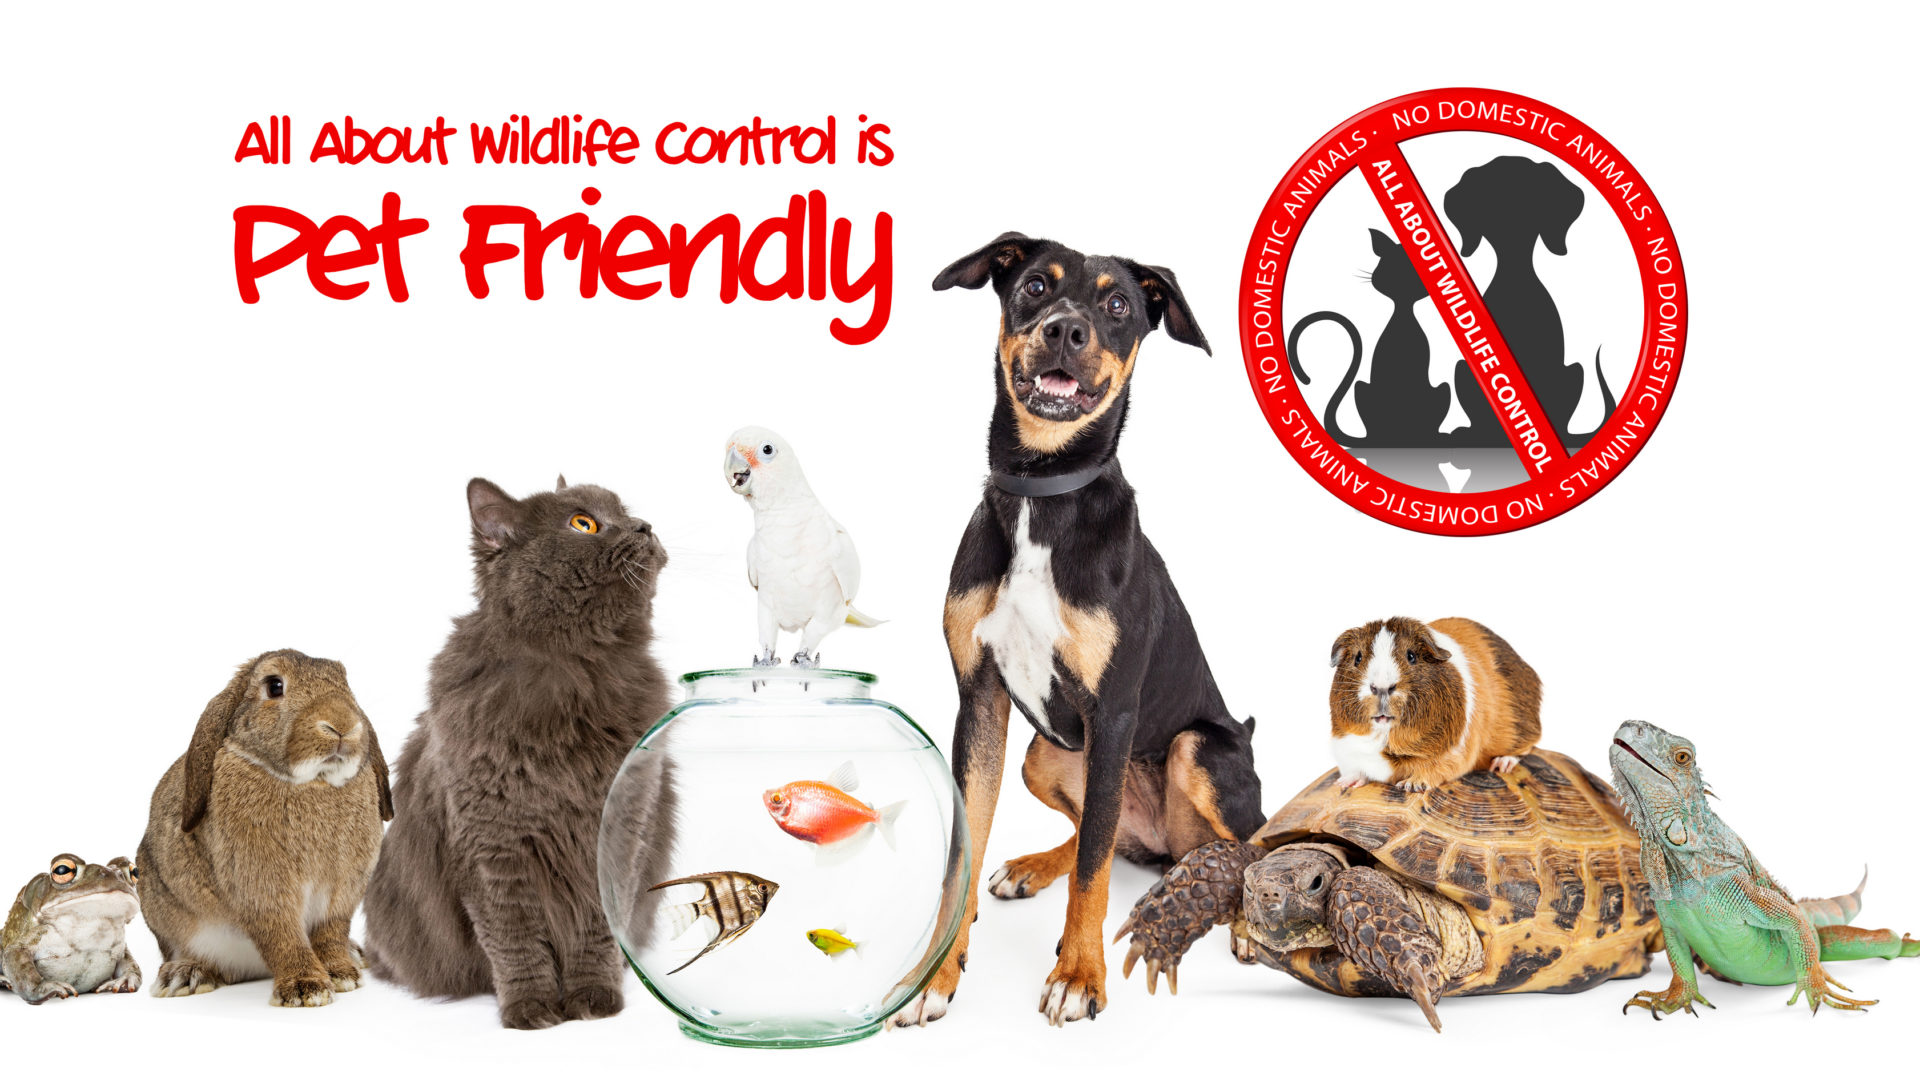 HUMANE ANIMAL CONTROL - Wildlife Animal Control | Trapping, Removal &  Prevention | ALL ABOUT WILDLIFE CONTROL